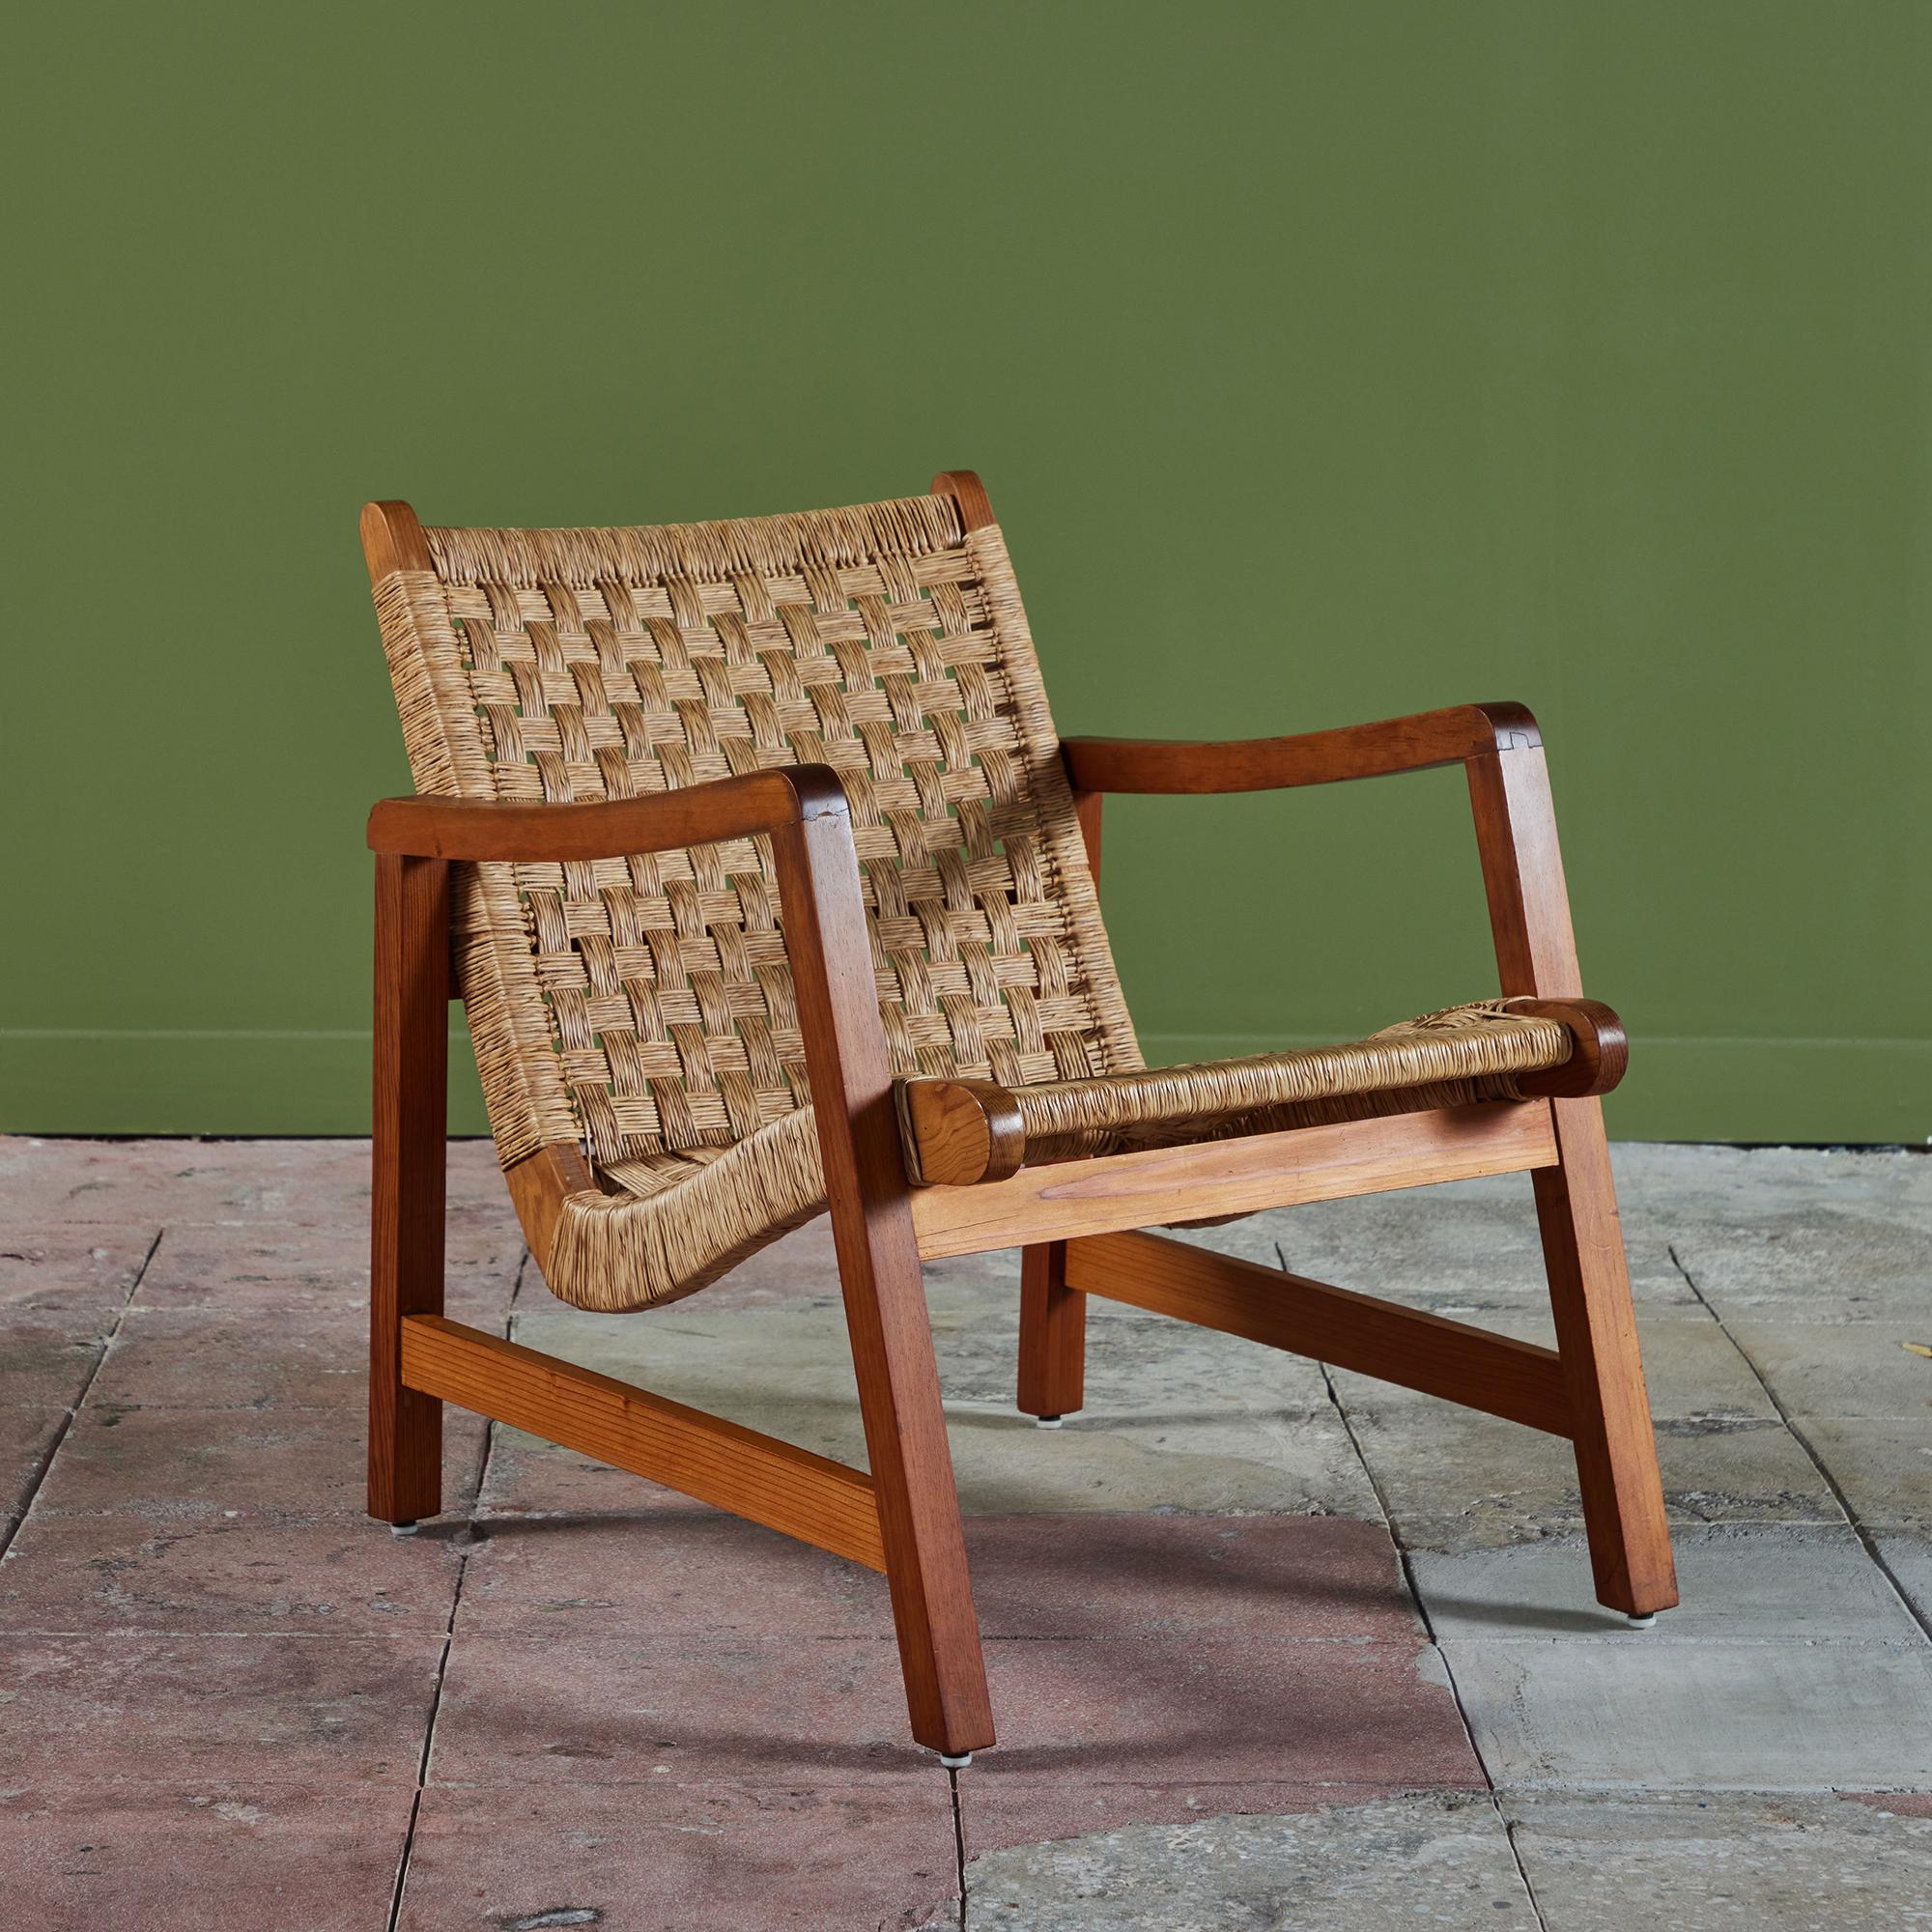 Bauhaus trained, Mexico City based designer Michael Van Beuren created highly functional modern pieces inspired by Mexican vernacular styles and materials. This lounge chair features a mahogany frame and a woven palm corded seat and